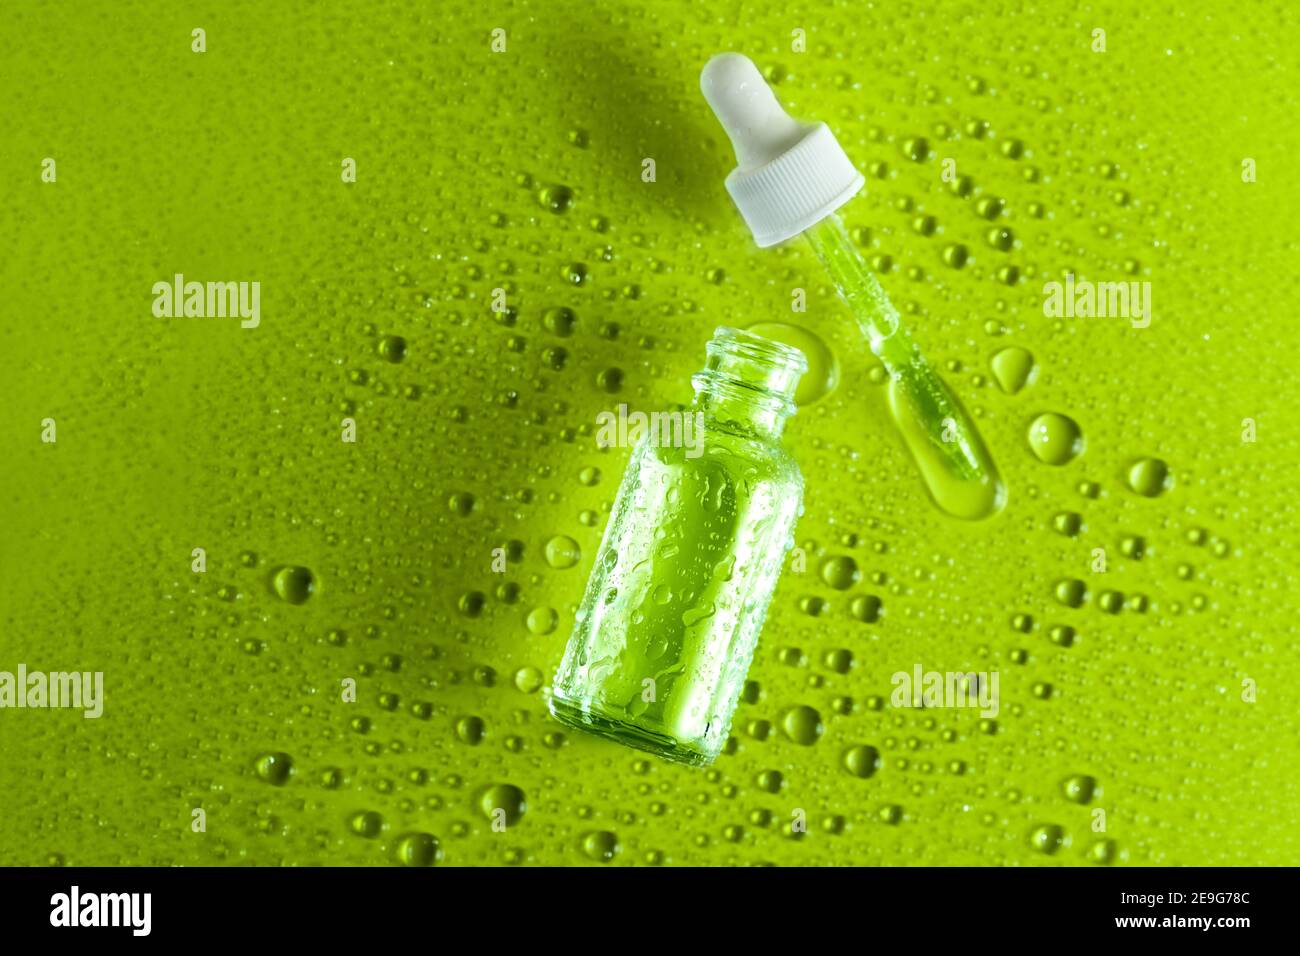 cannabis oil face serum,  alternative medicine and beauty industry. Clear glass bottle with medicine dropper on green background with liquid drops and Stock Photo